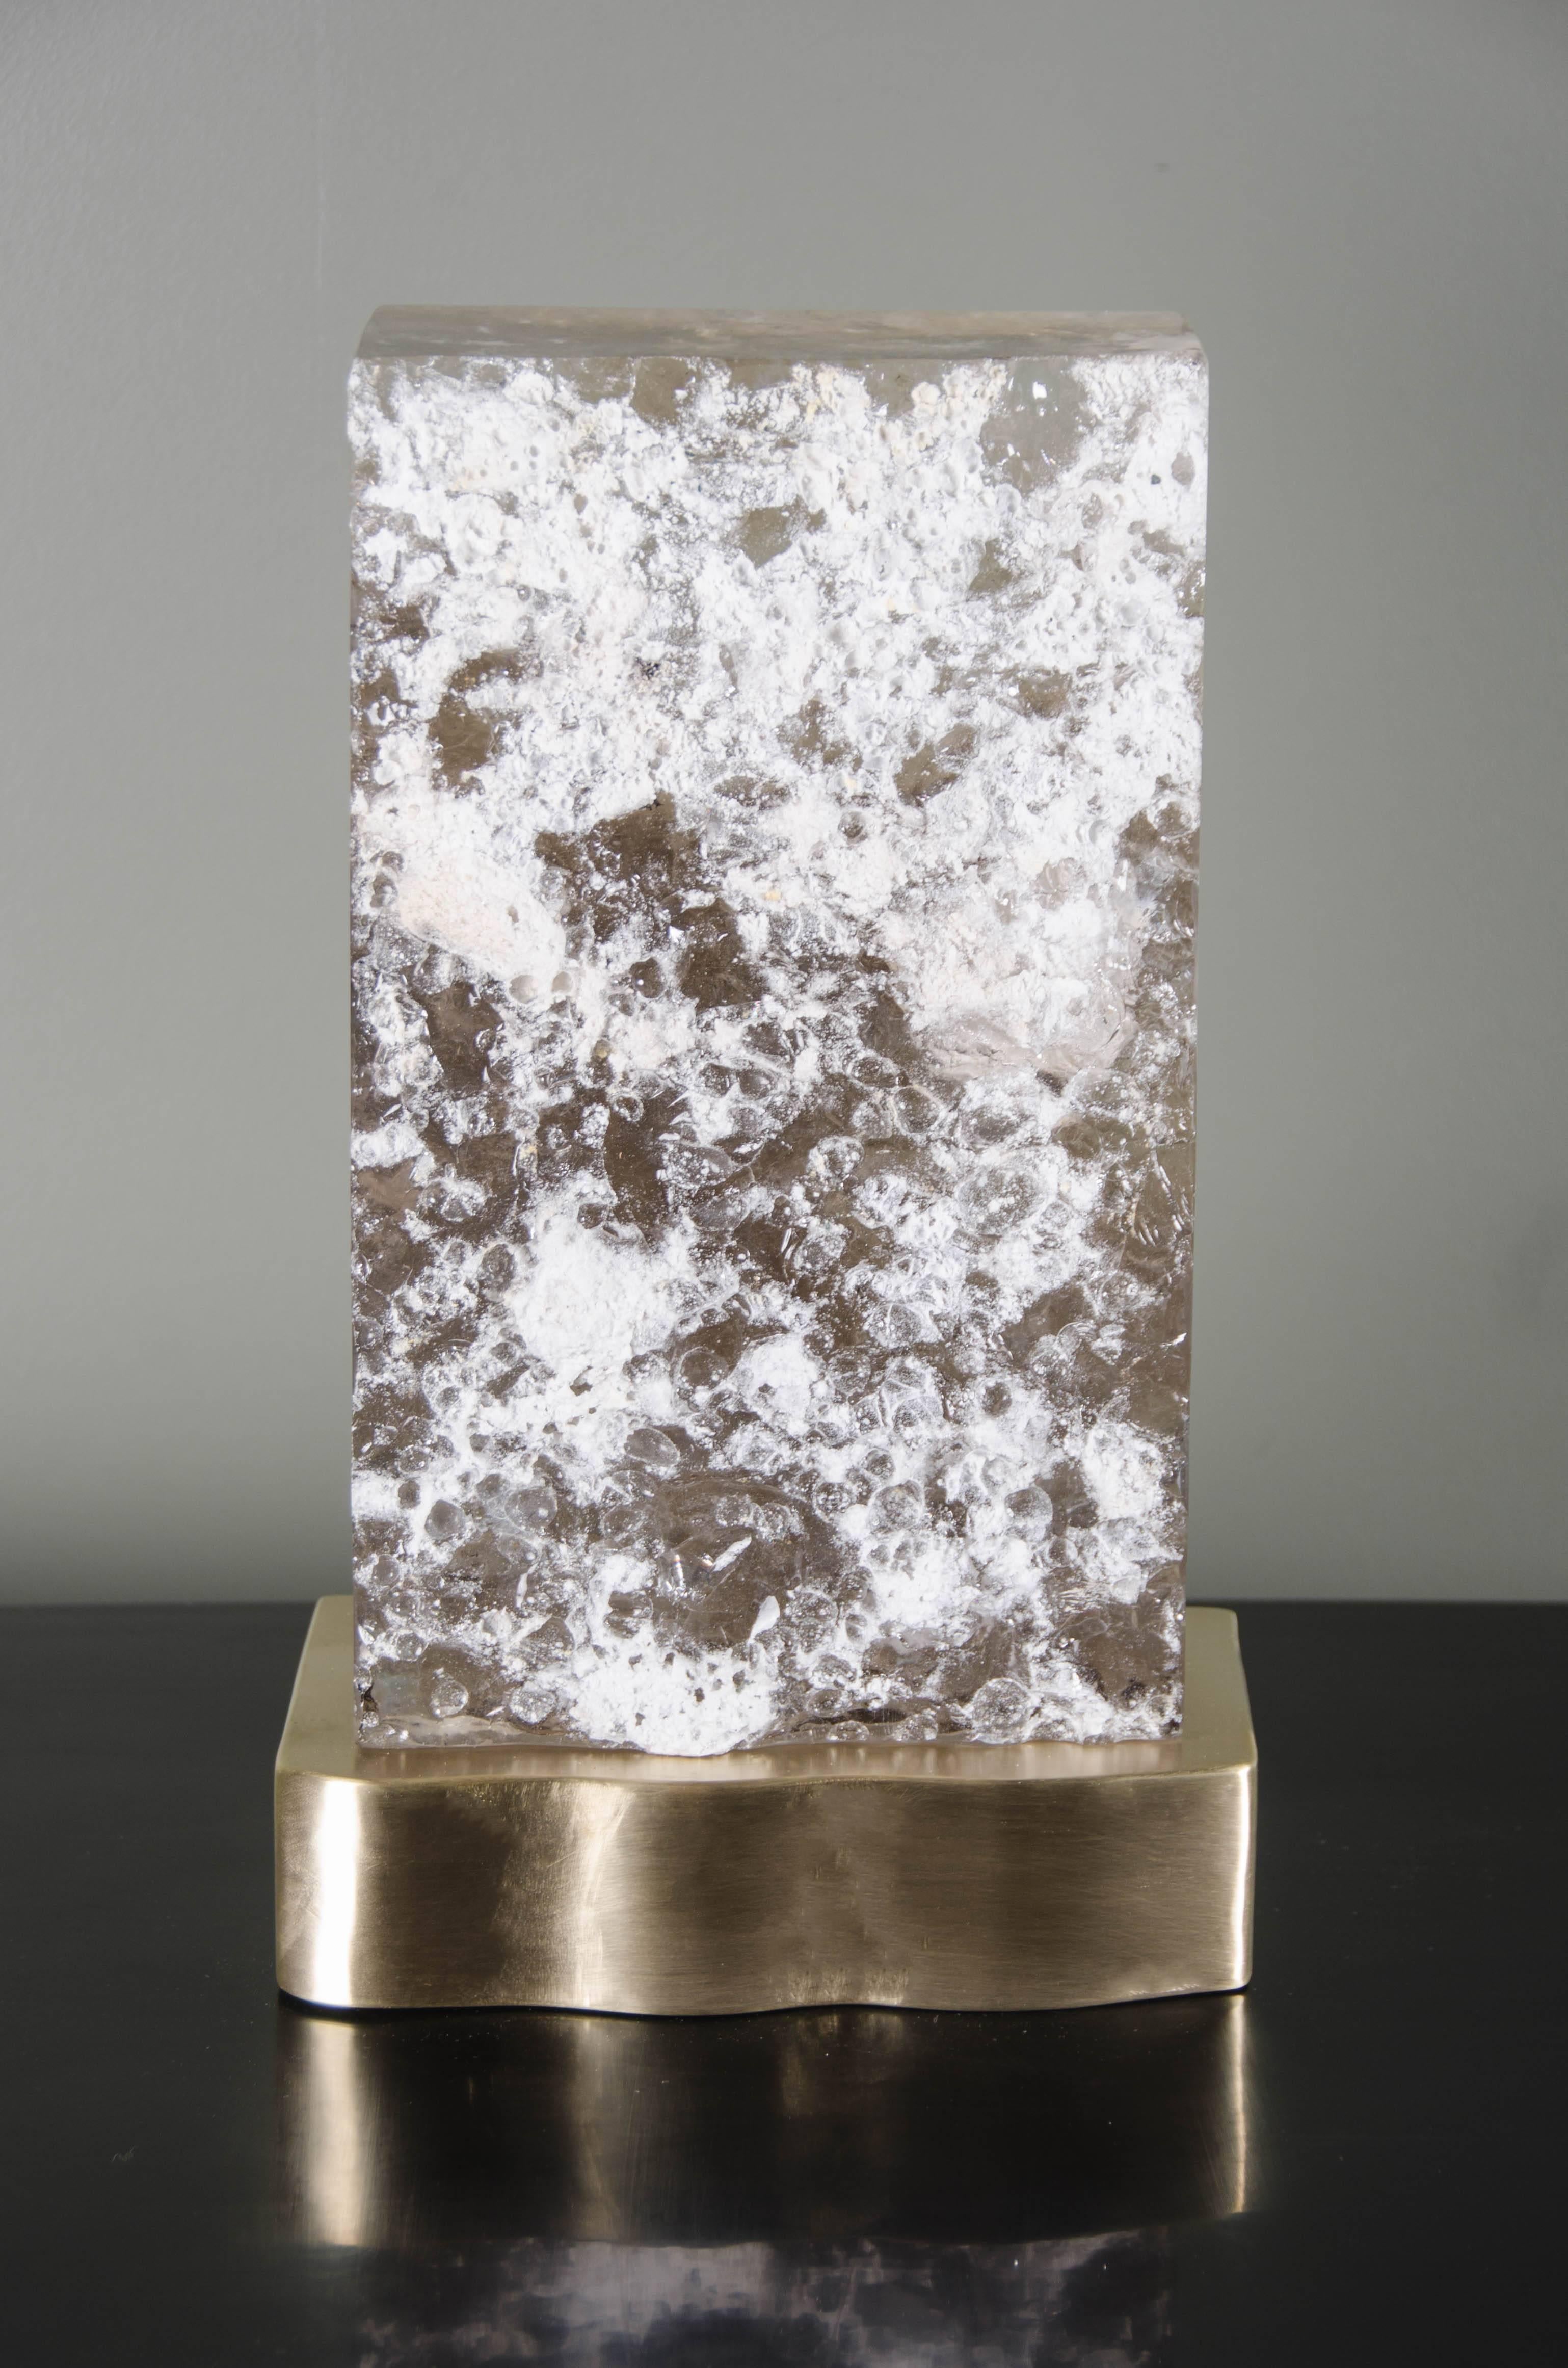 Cuadra light
Smoke crystal
Hand-carved
Brass base
Hand repoussé
Limited edition

Inclusions and shape slightly vary.
  